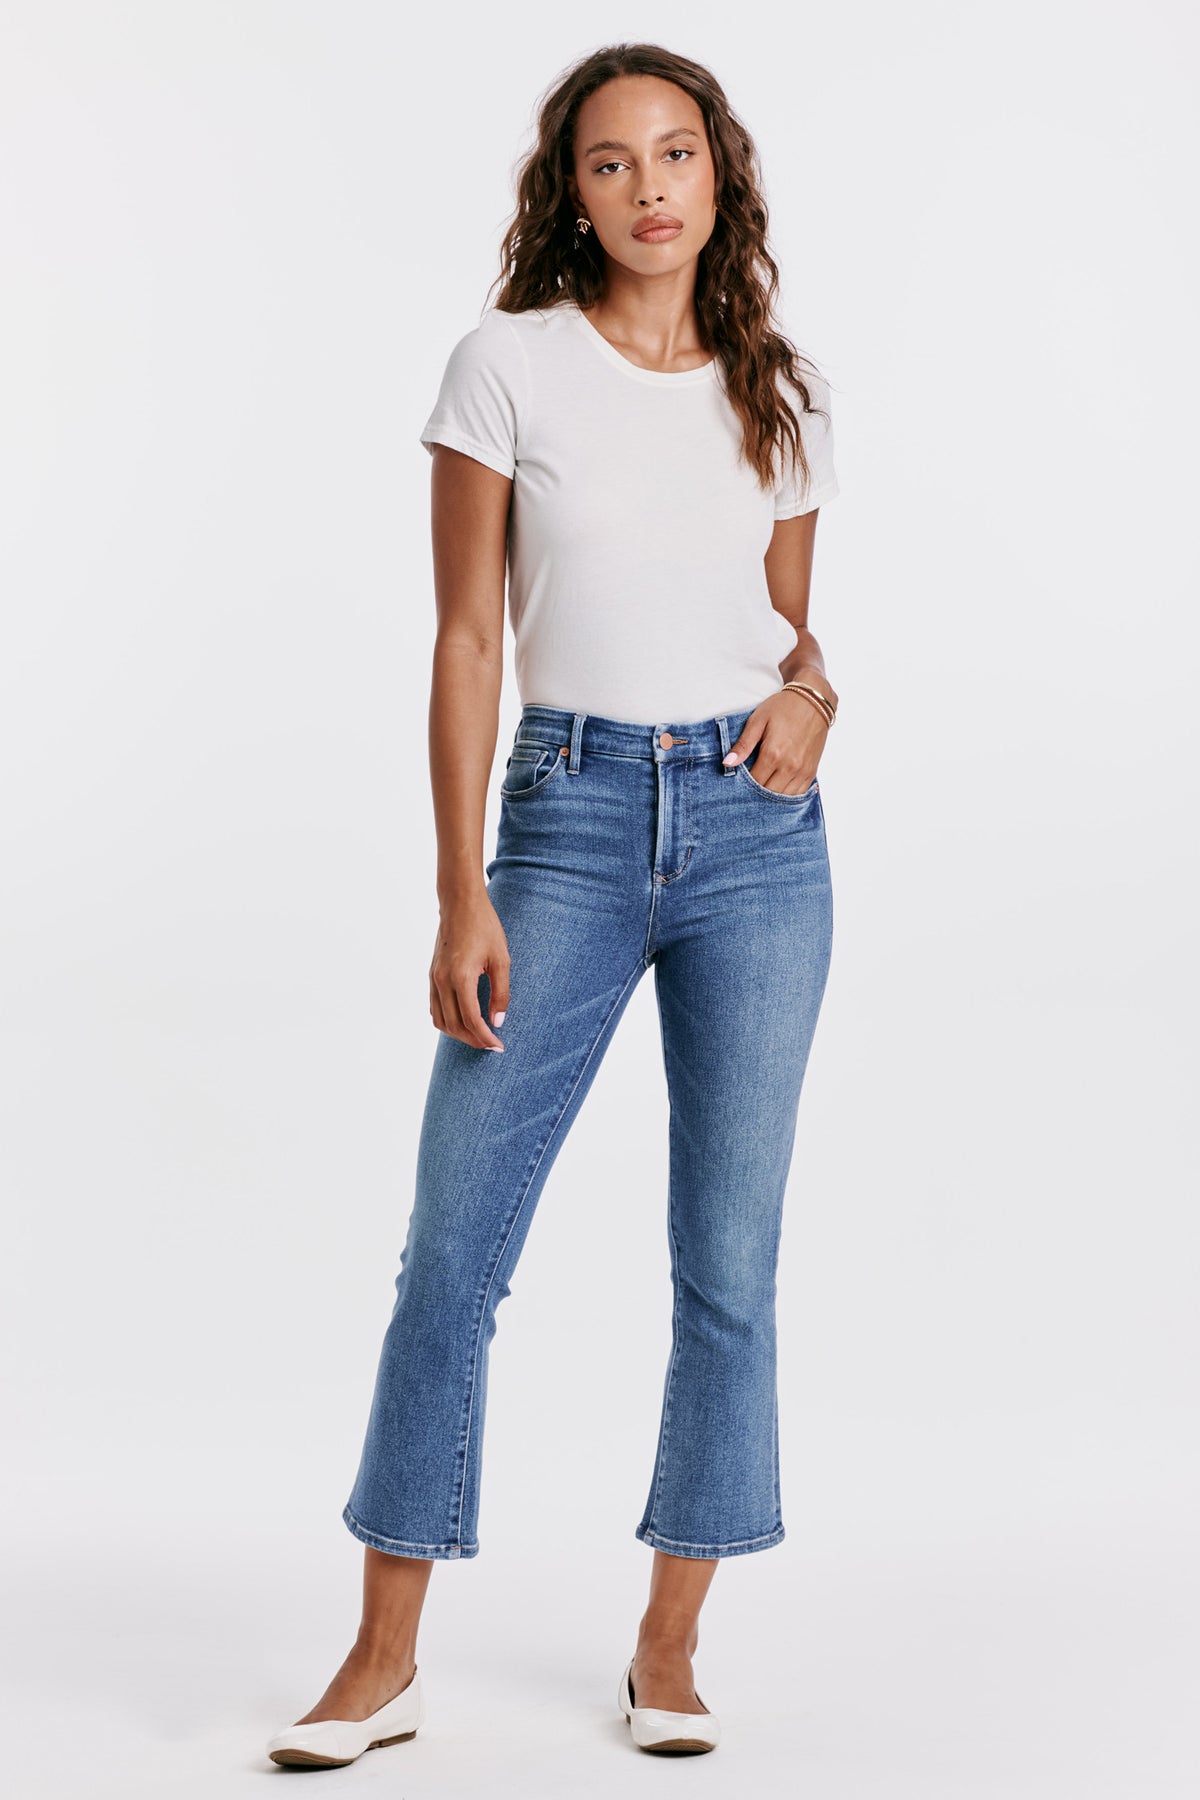 DUER Women's Four Way Flex Denim High Rise Skinny Jean | High Country  Outfitters